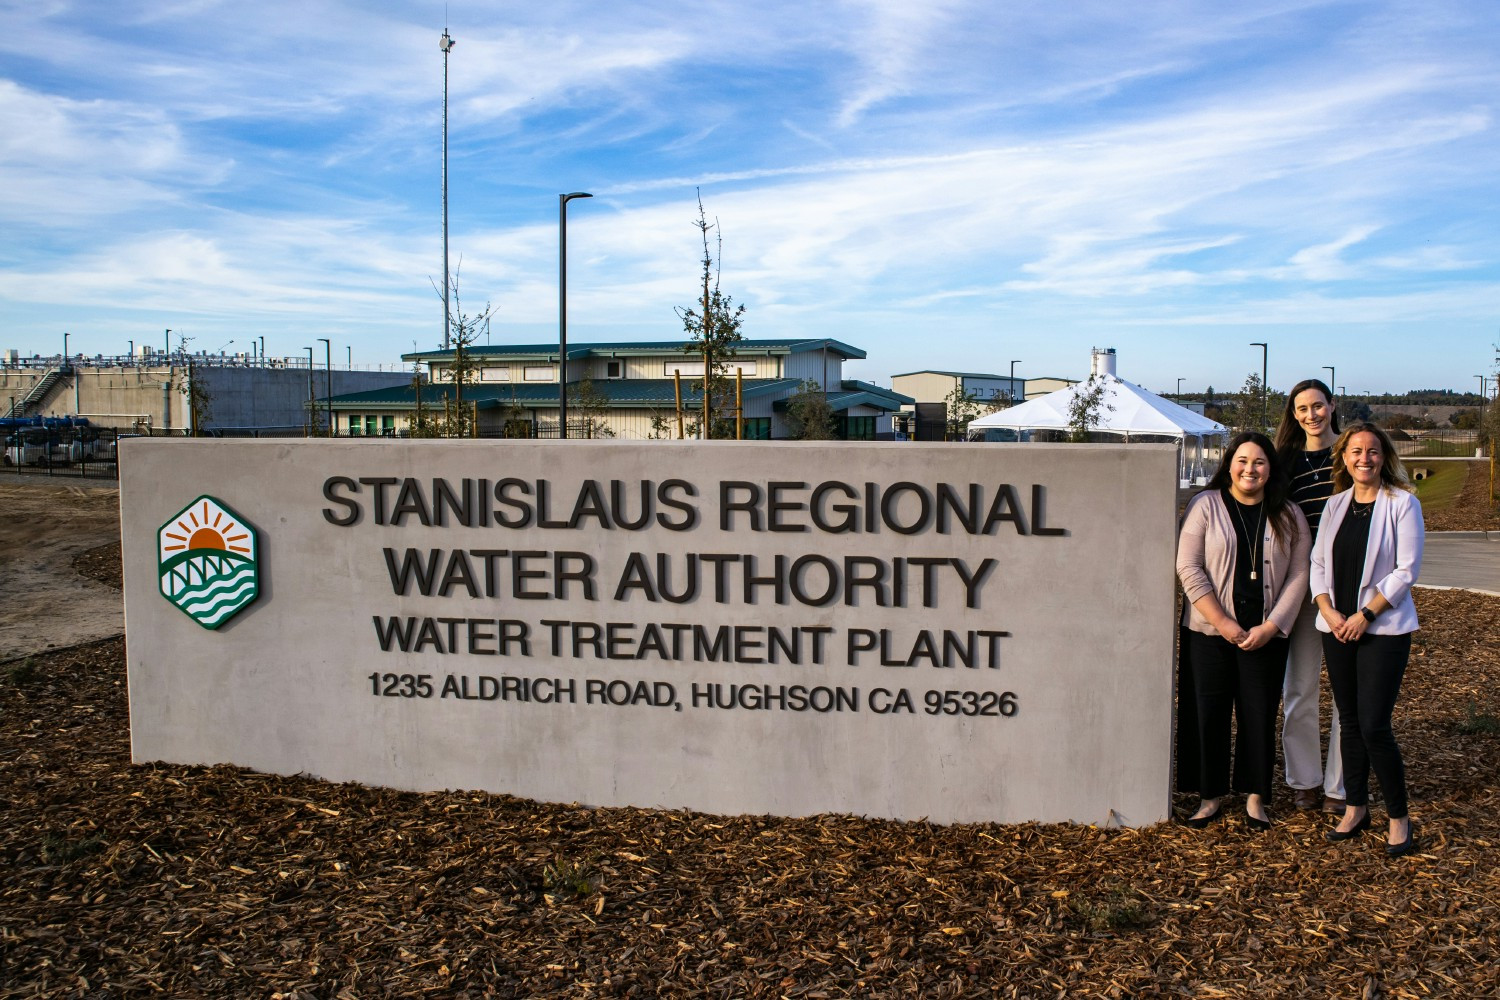 West Yost and SRWA launched a historic regional treatment facility to diversify water supply and groundwater recharge